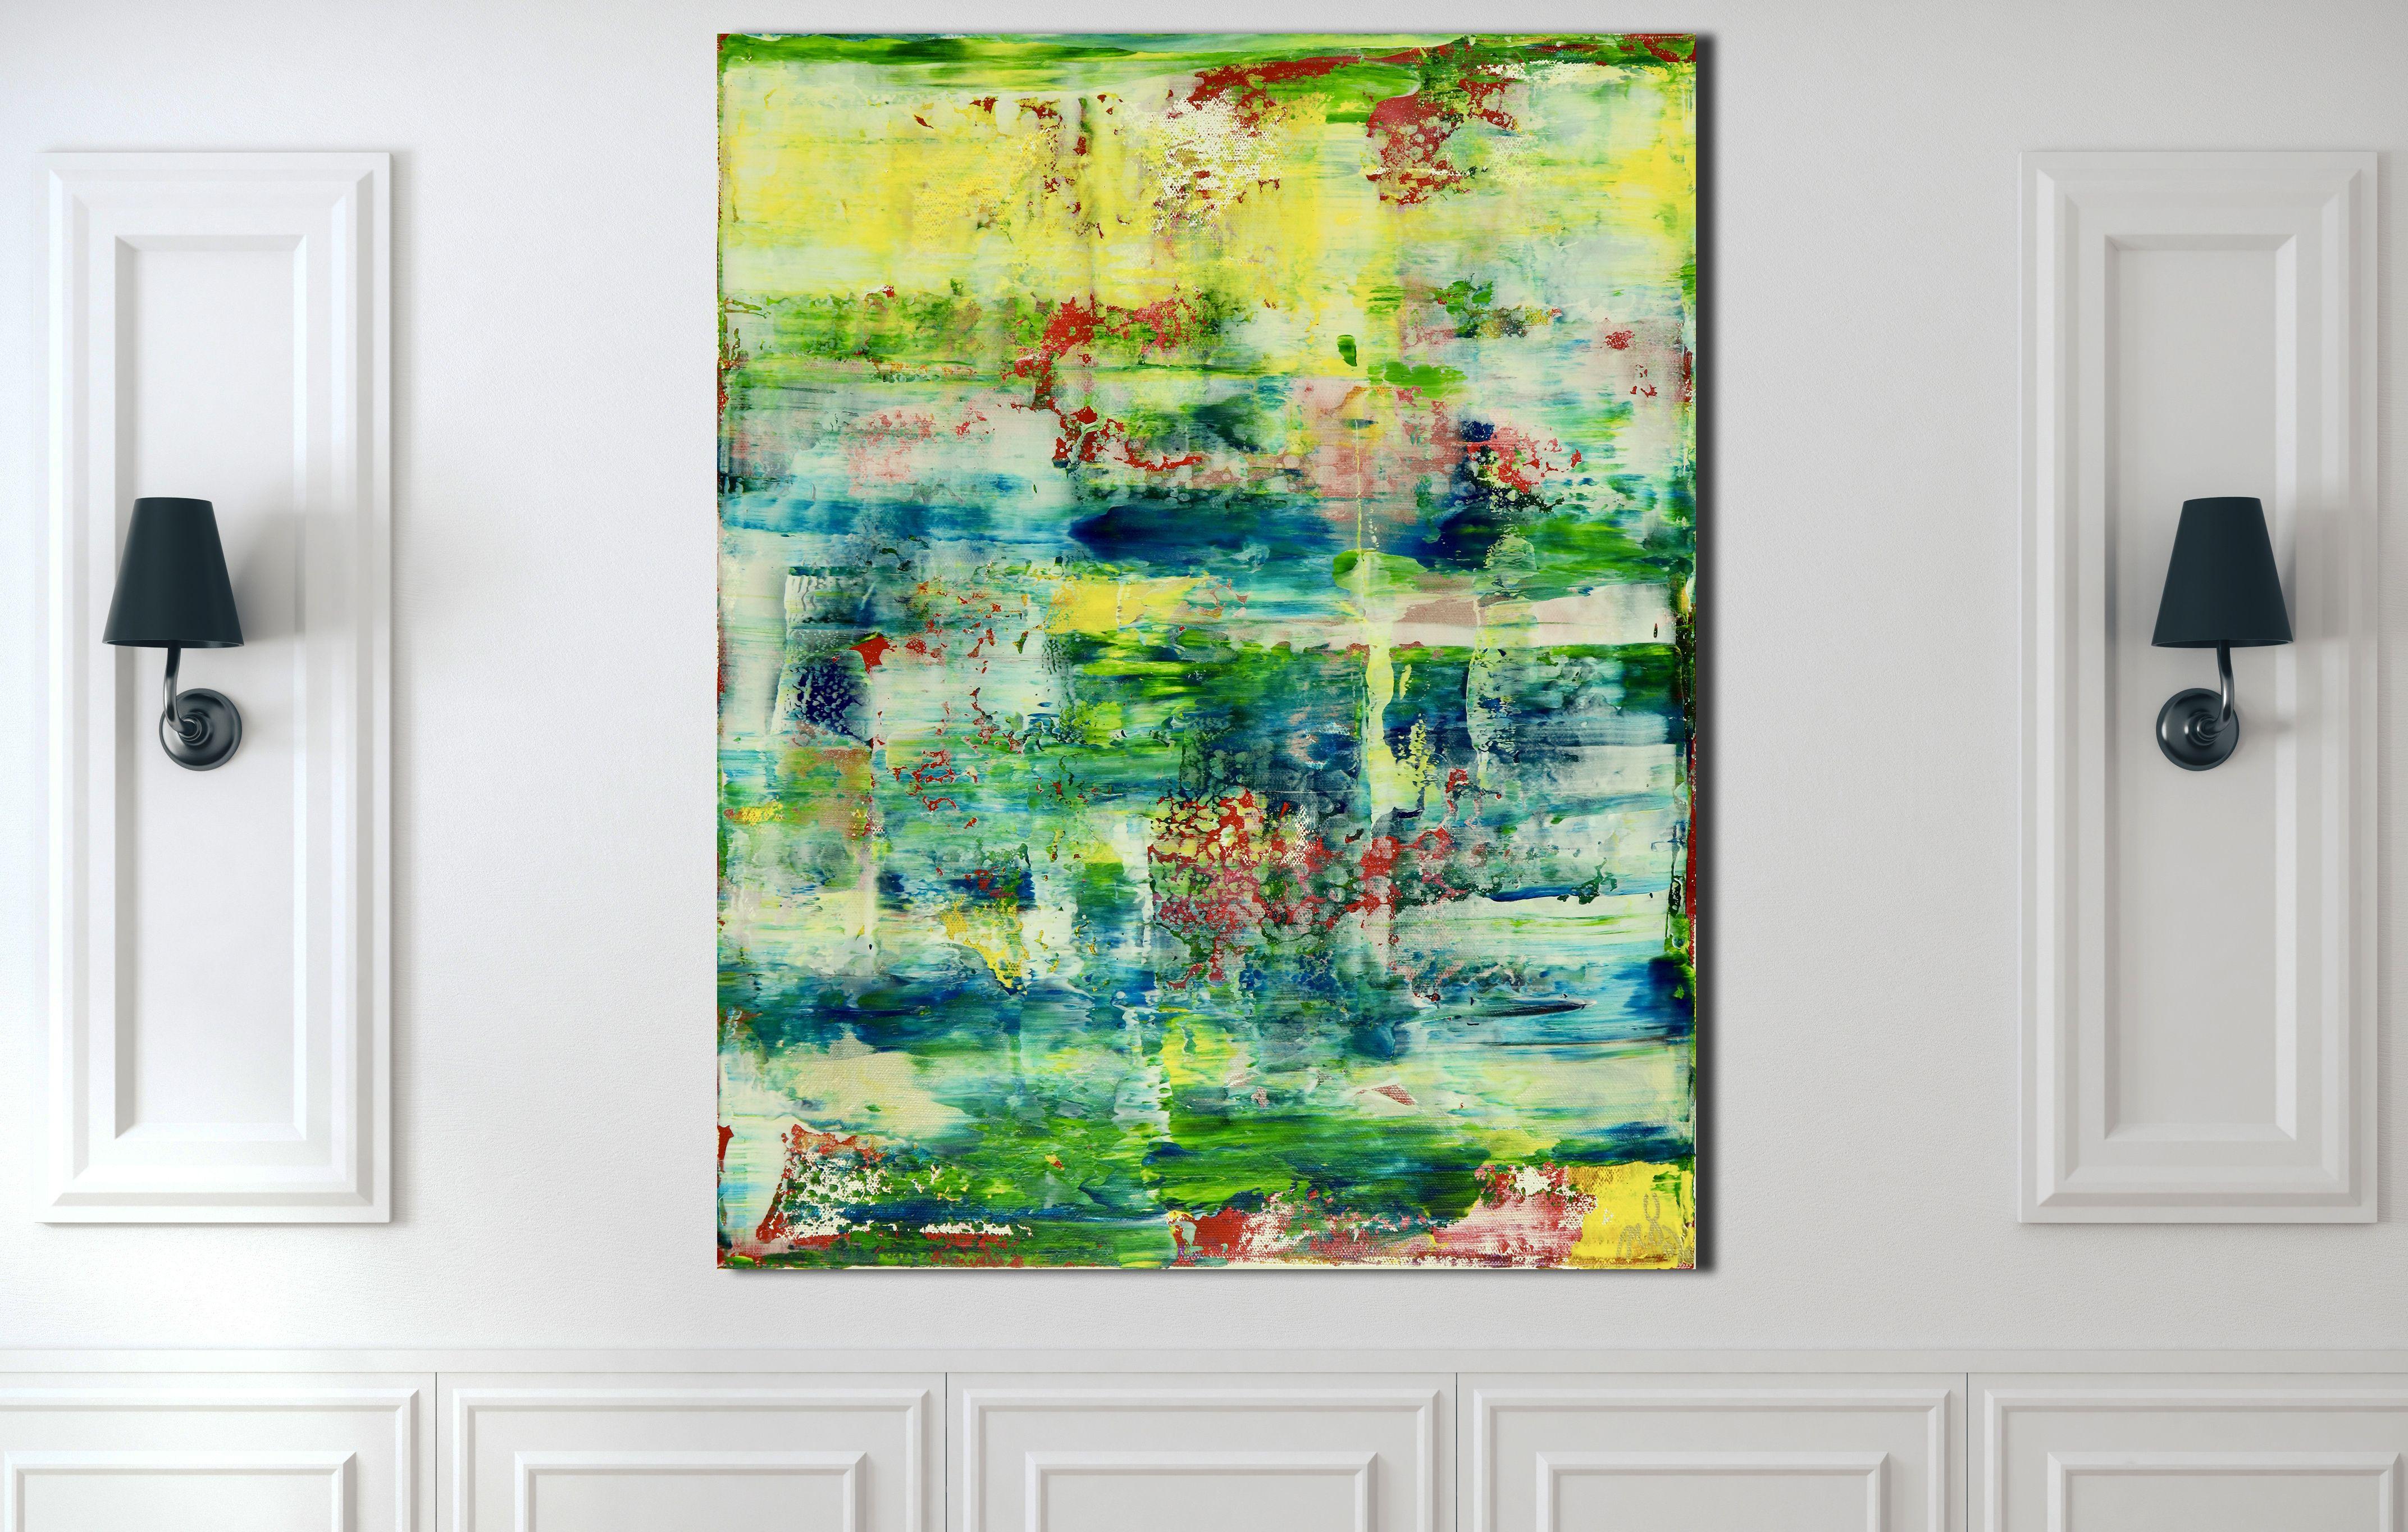 Bright abstract with vivid colors. Green, blue, orange, yellow, iridescent clear acrylic. Signed in front and ready to hang.    I include a certificate of authenticity that lists the materials as well as when the painting was completed. Fine high